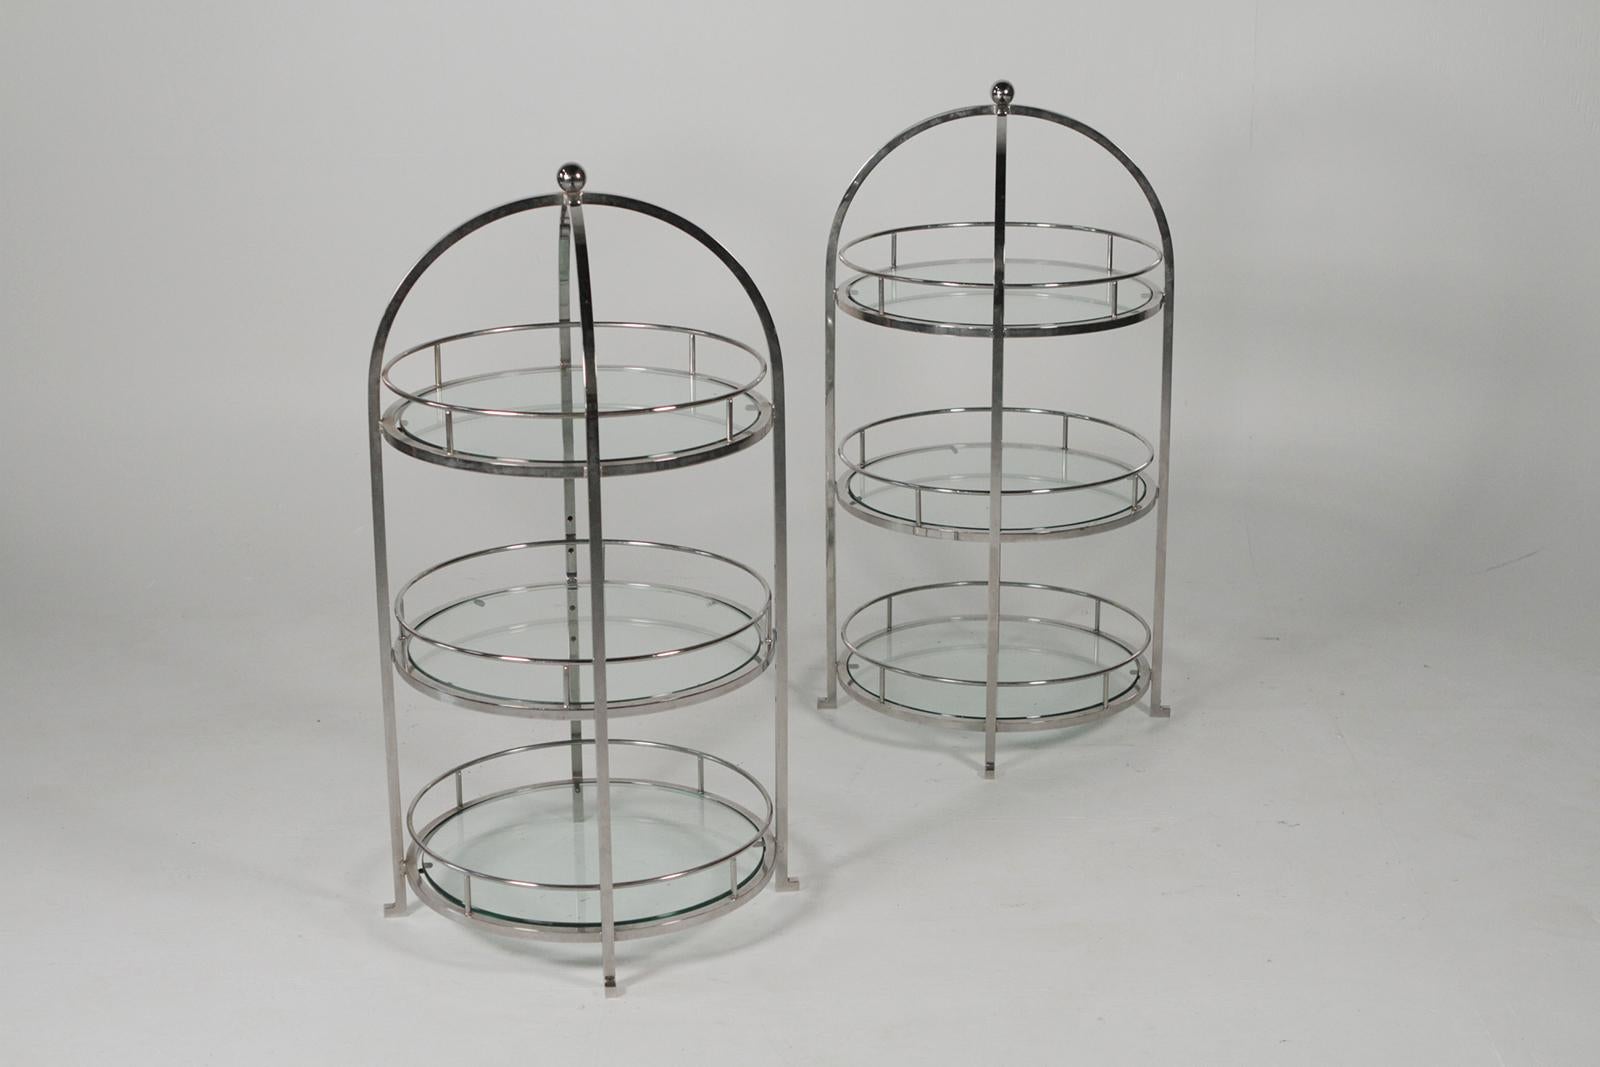 MCM pair of chrome and glass side tables, three-tiered glass with chrome-plated steel frames. These would work as side tables or as servers on a large dining table or sideboard. Solid welded steel frames, chrome-plated.
